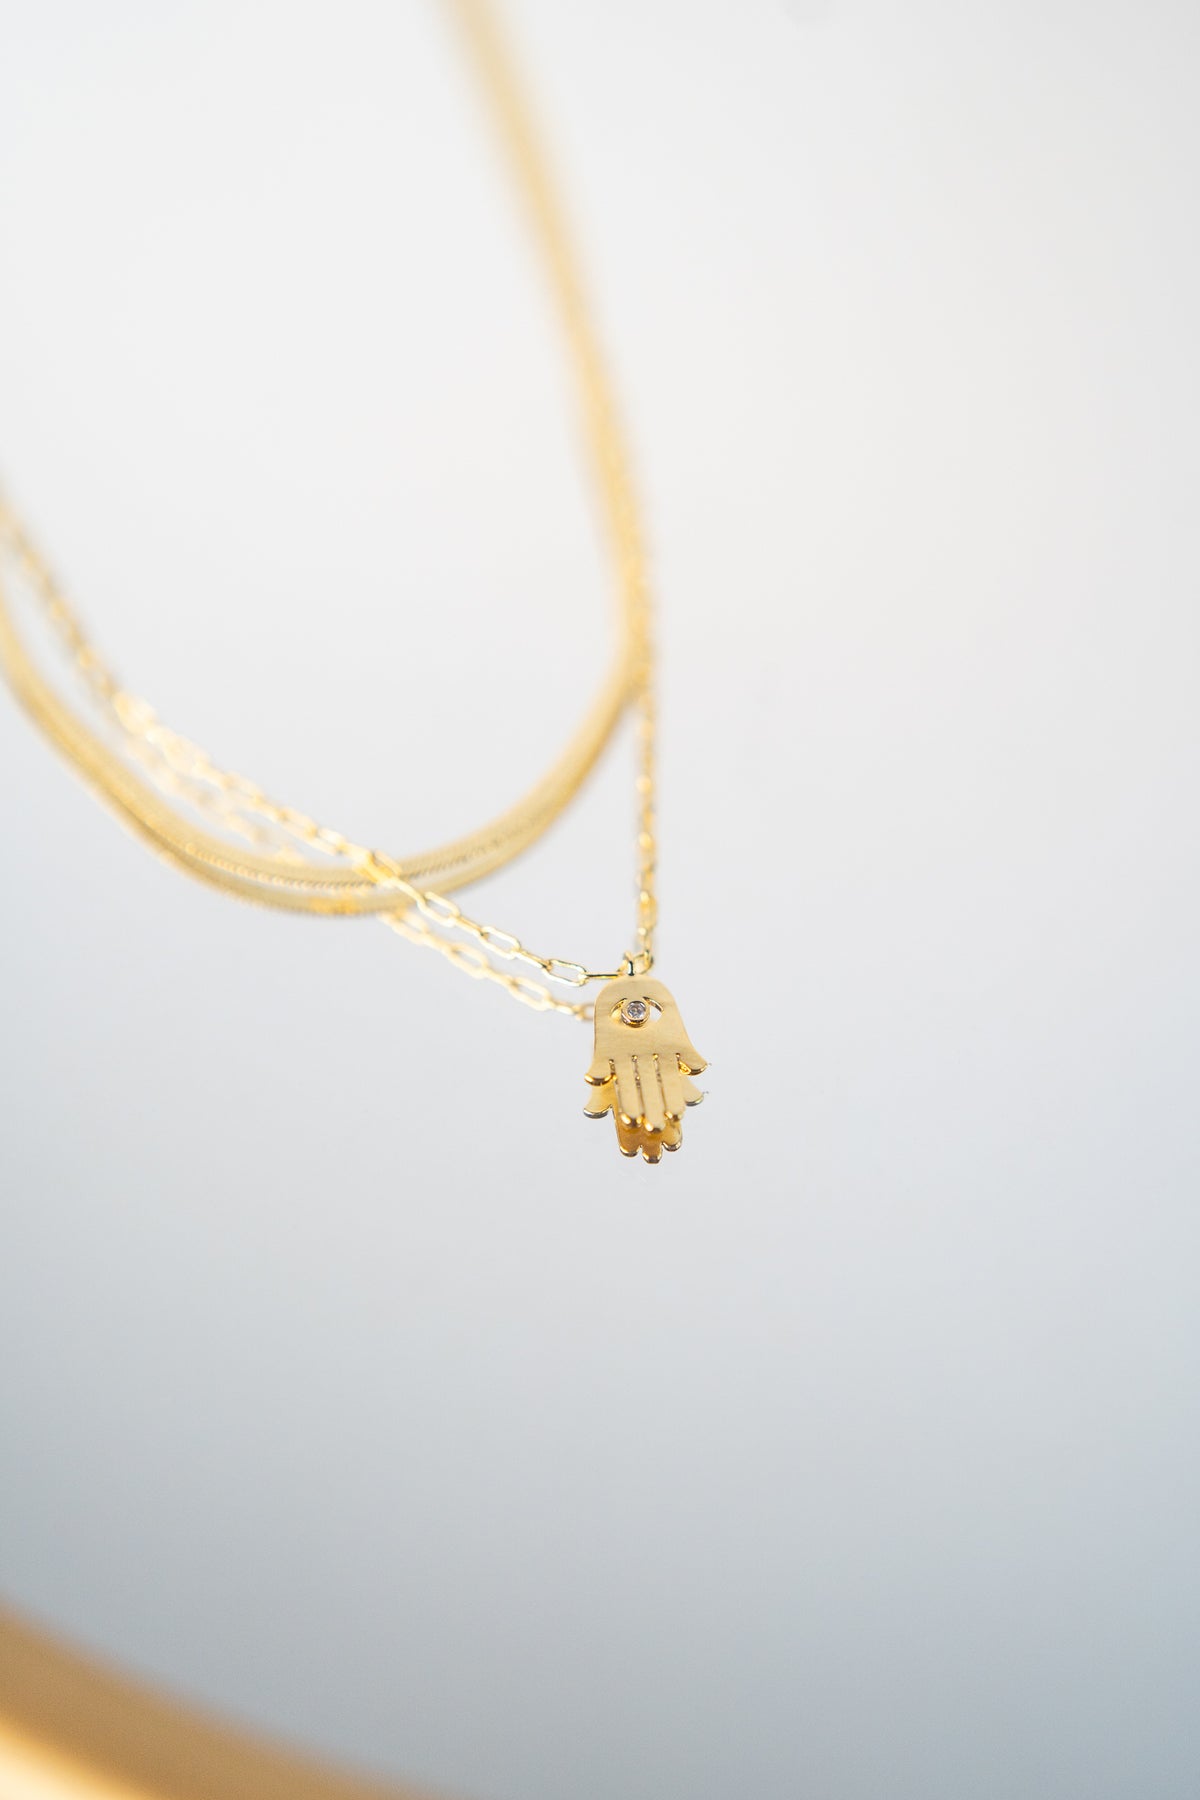 14K Solid Gold Hamsa Necklace, Dainty Necklace, Layering Necklace, 16/18 Necklace